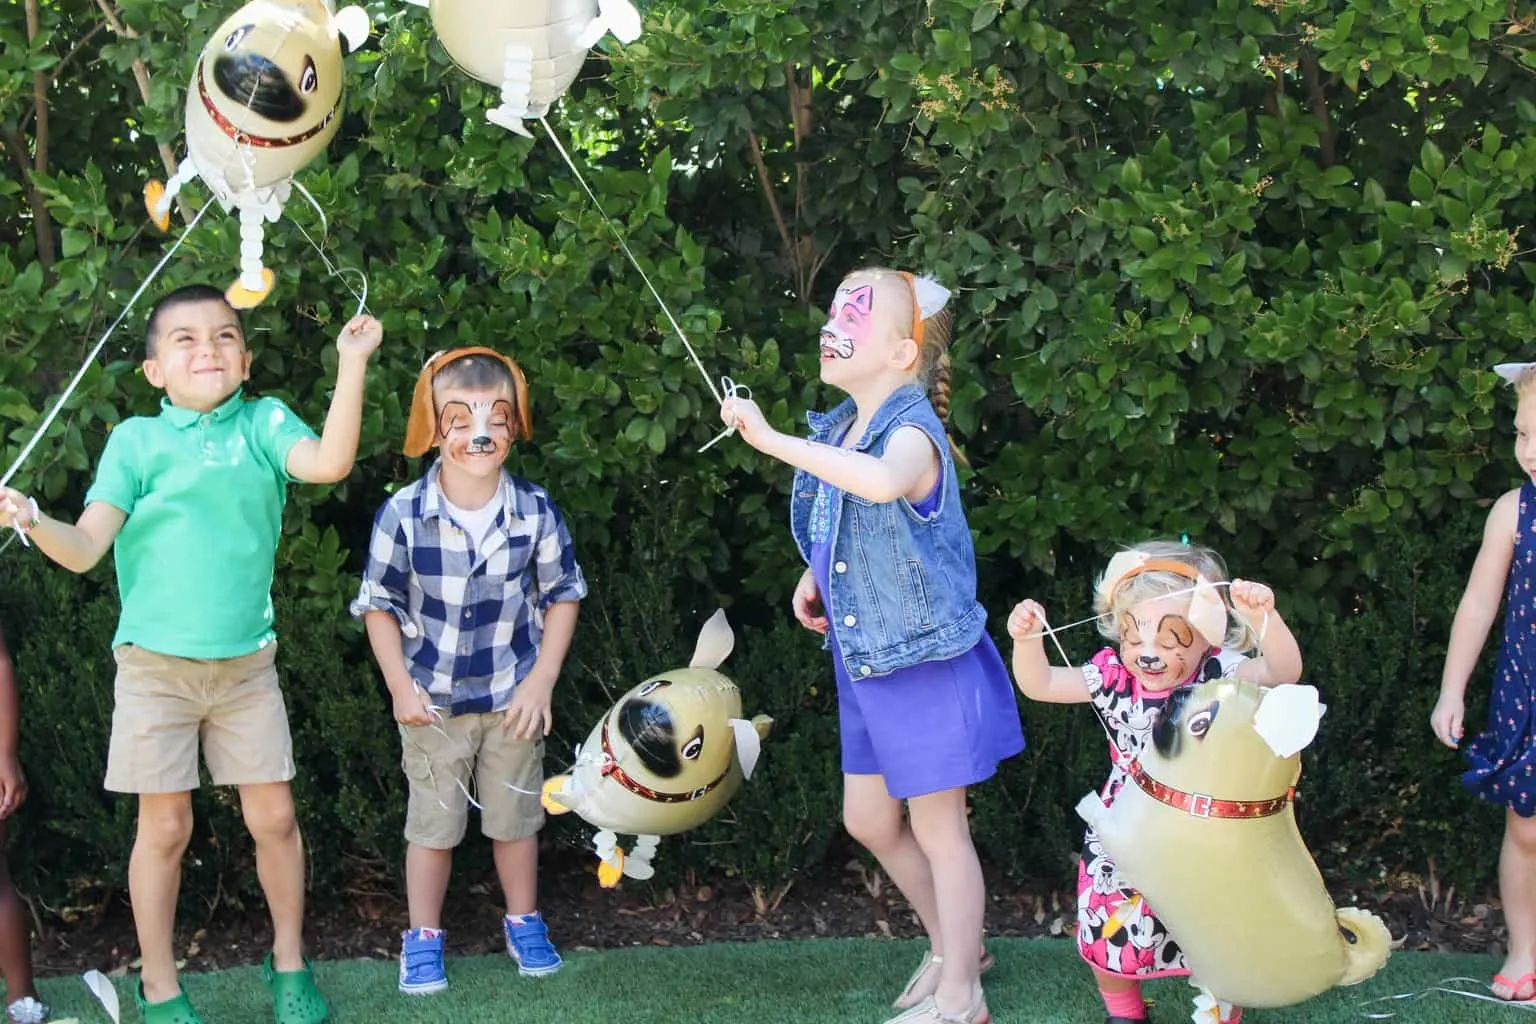 Are you planning a Disney Junior Puppy Dog Pals birthday party? Then check out out this list of of 10+ Unique Puppy Dog Pals Birthday Party Ideas for any occasion.